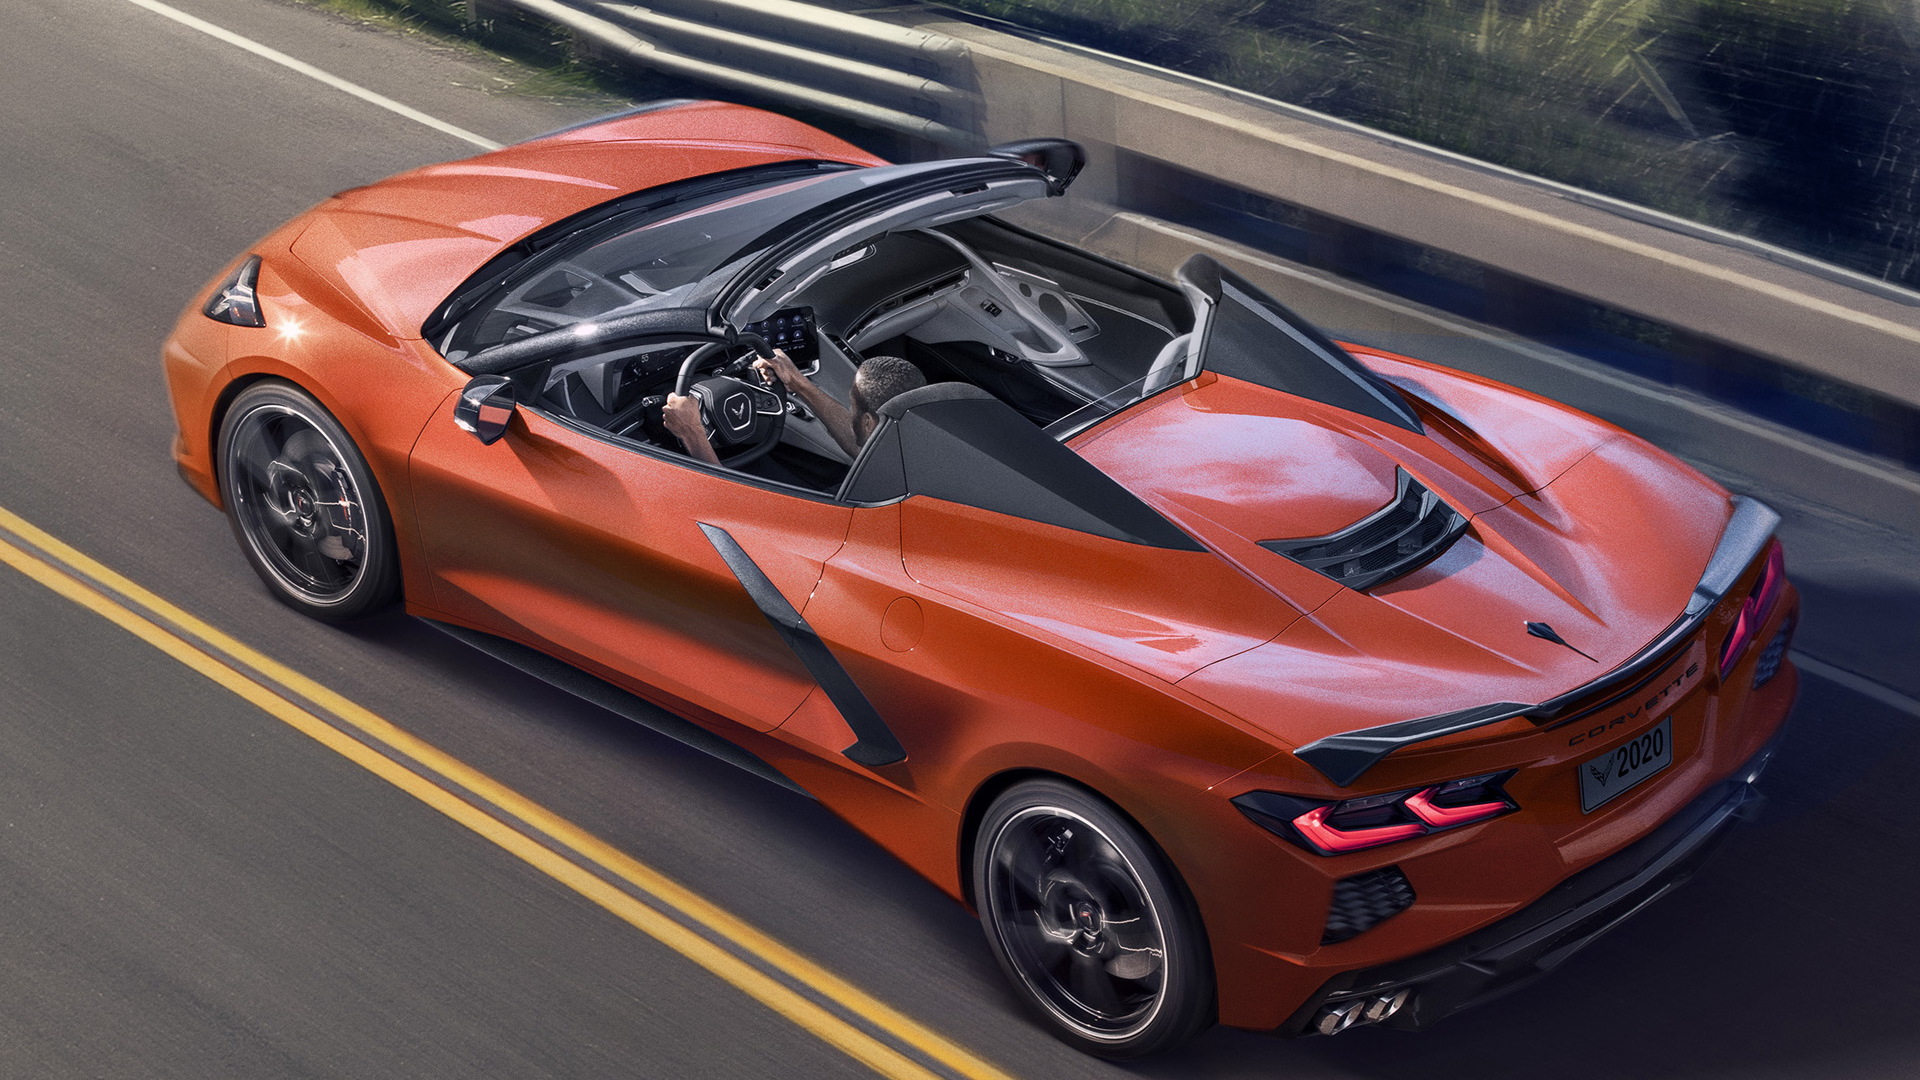 2020 Corvette Convertible revealed with retractable hardtop, 7,500